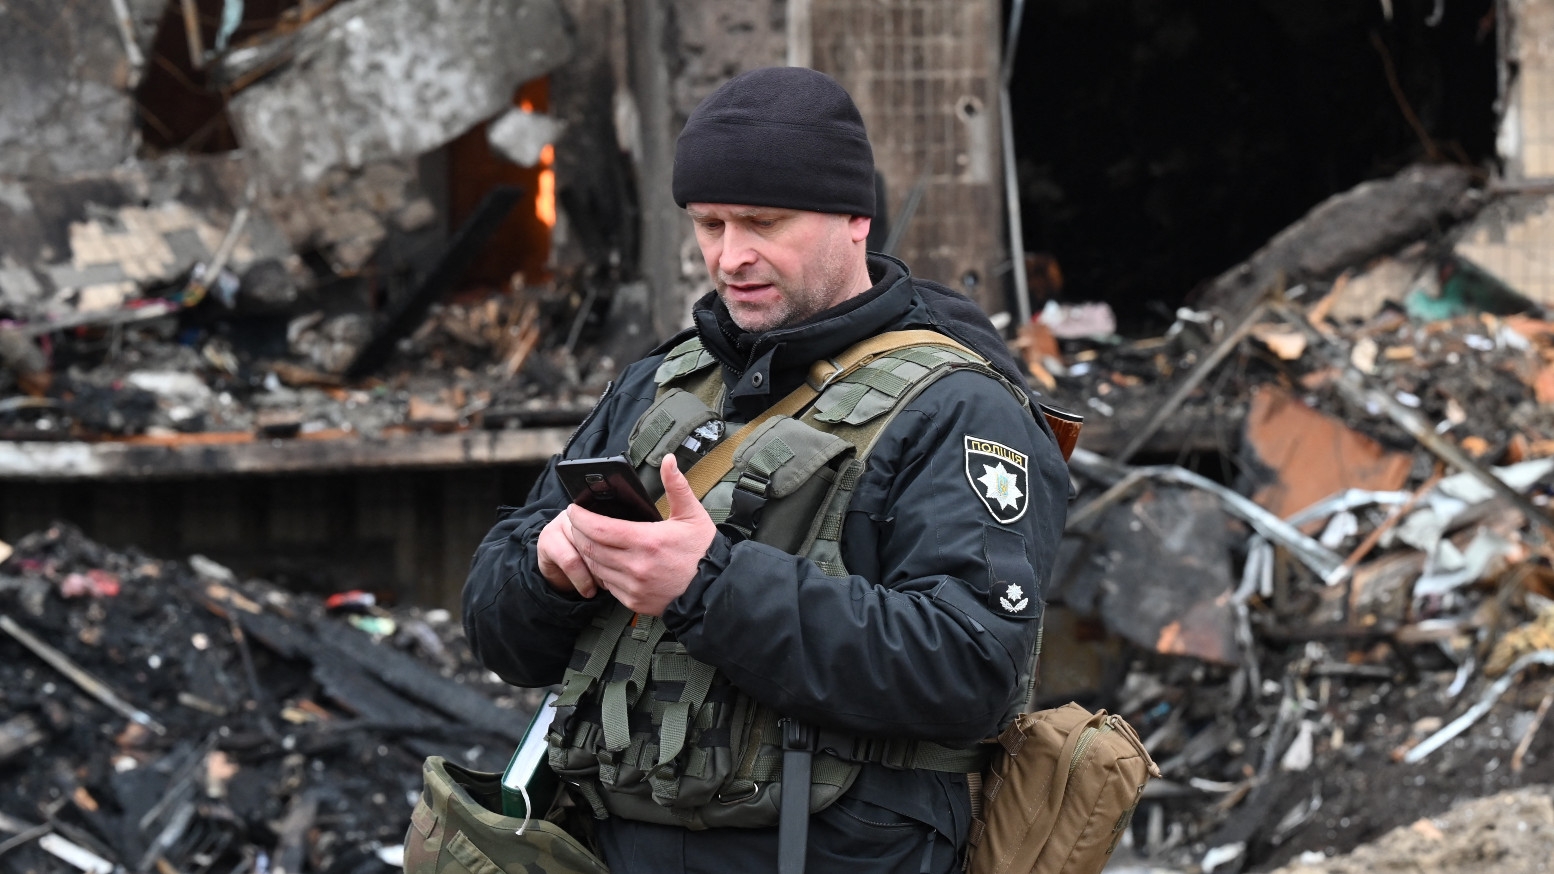 A police officer stands guard at a damaged residential building in the Ukrainian capital Kyiv on 25 February 2022 